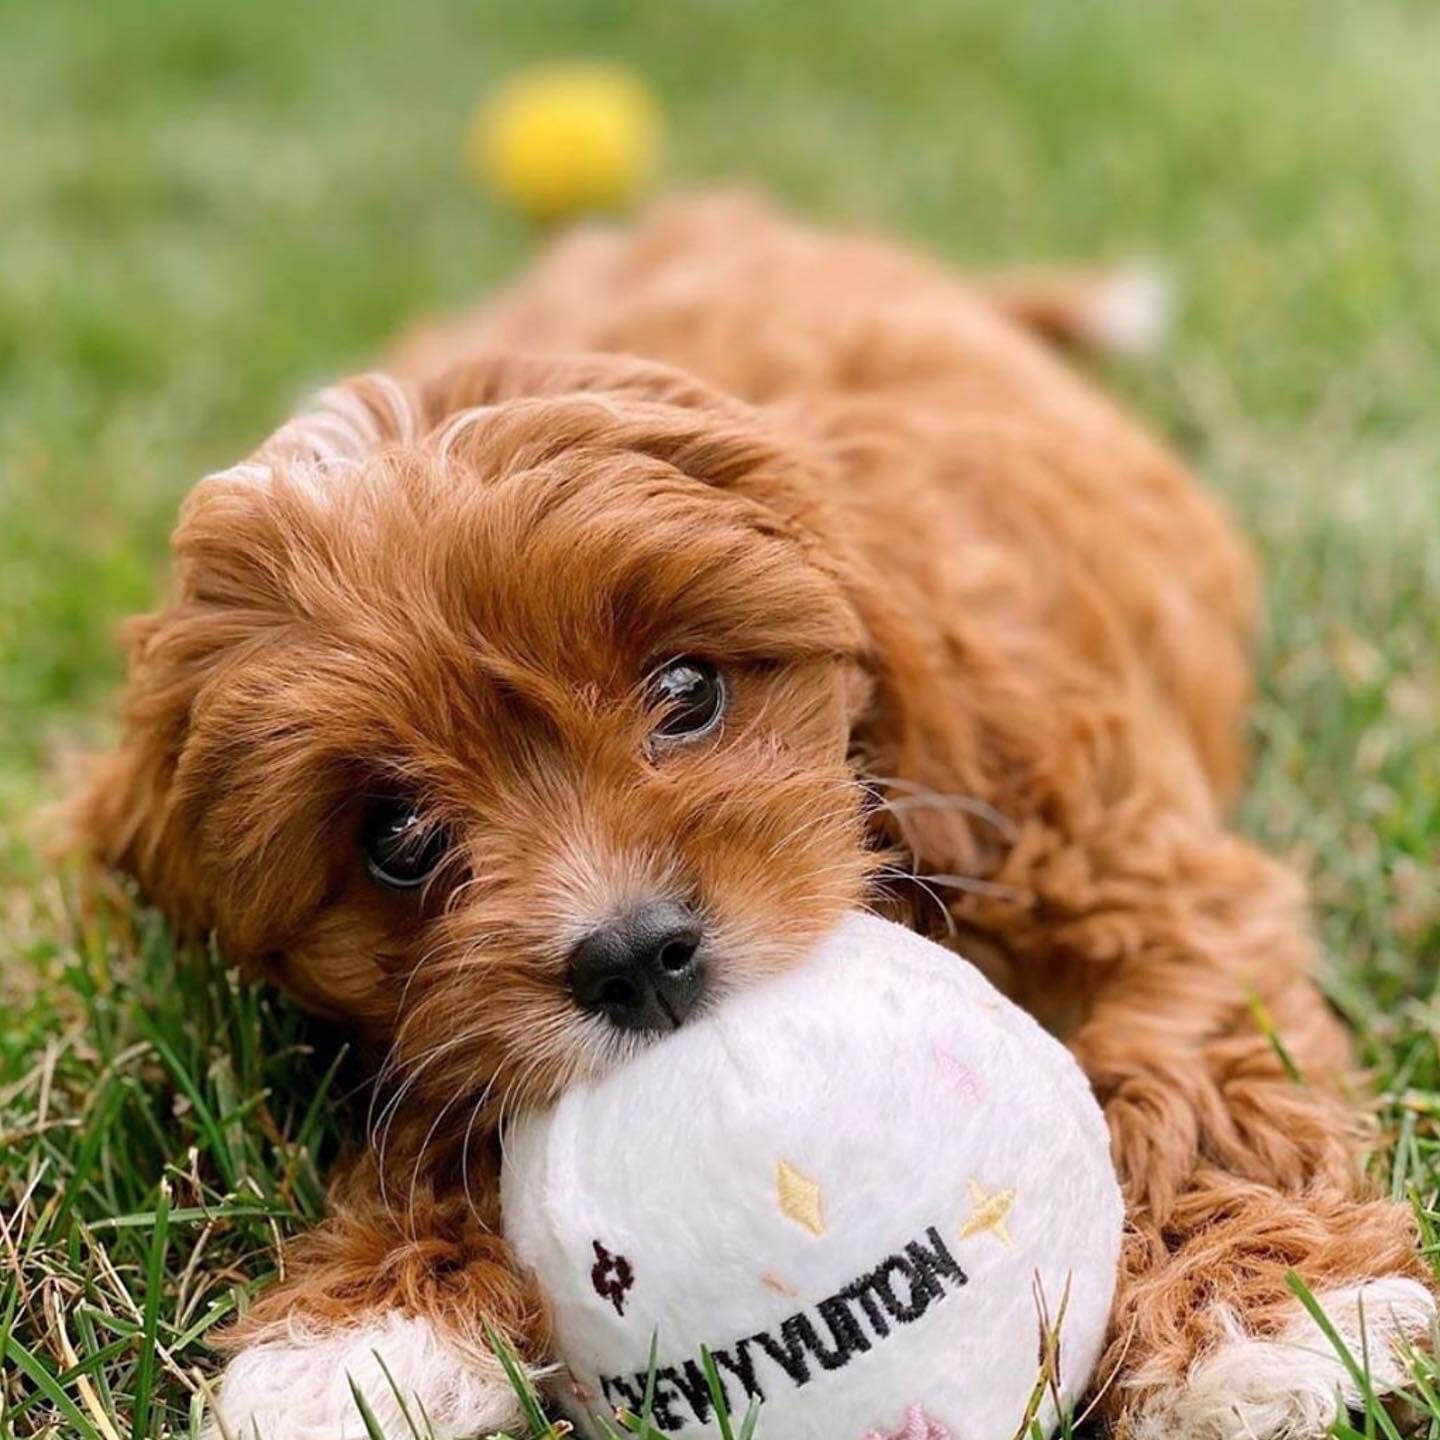 Chewy Vuitton Ball